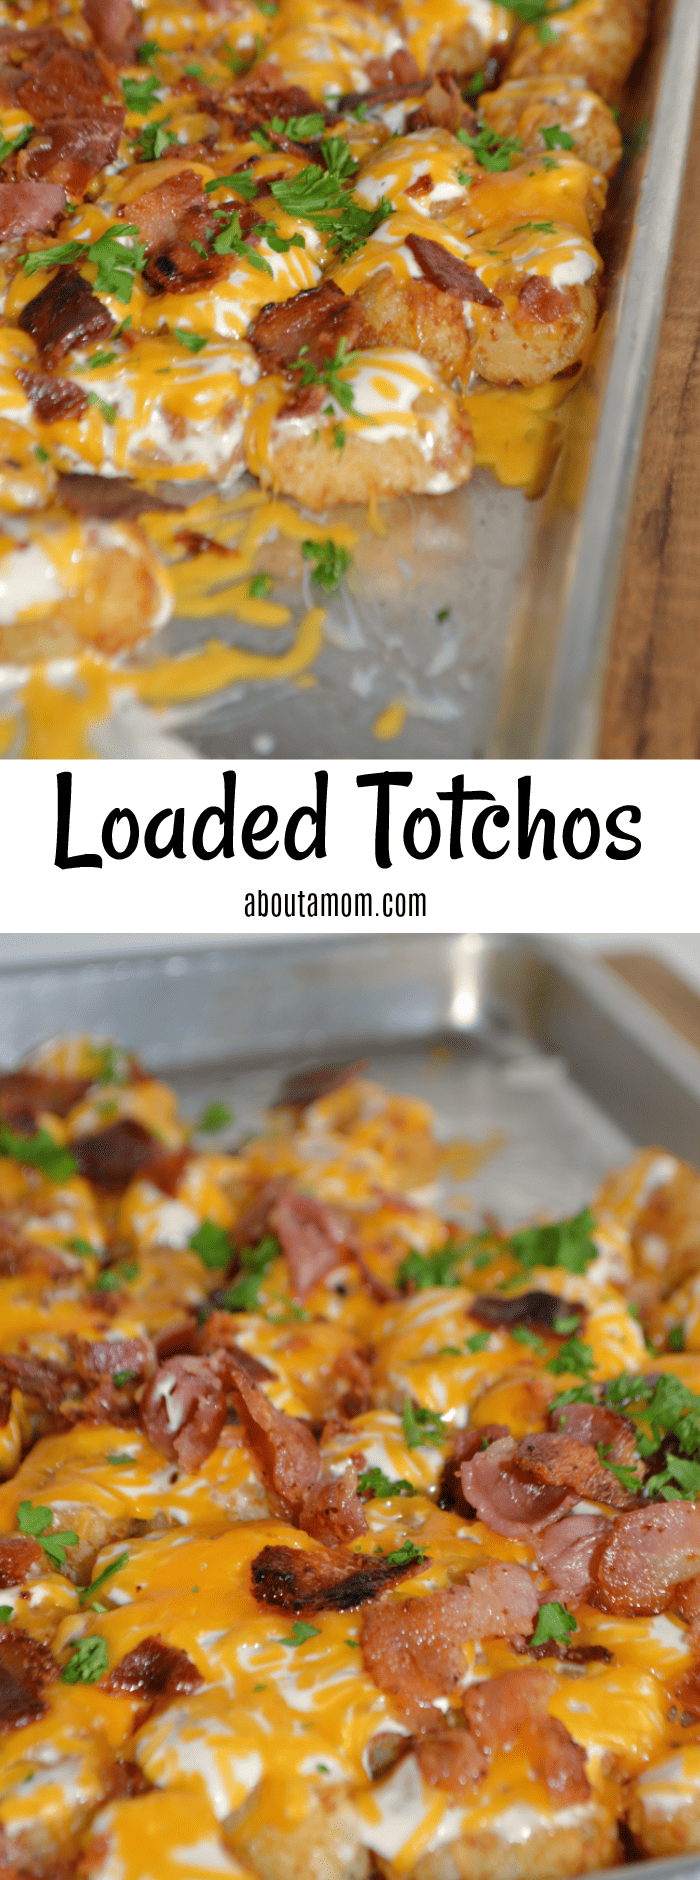 Forget Nachos. Instead try Loaded Totchos which are TATER TOTS cooked crispy then smothered and covered with a cheesy, ranch and bacon topping.